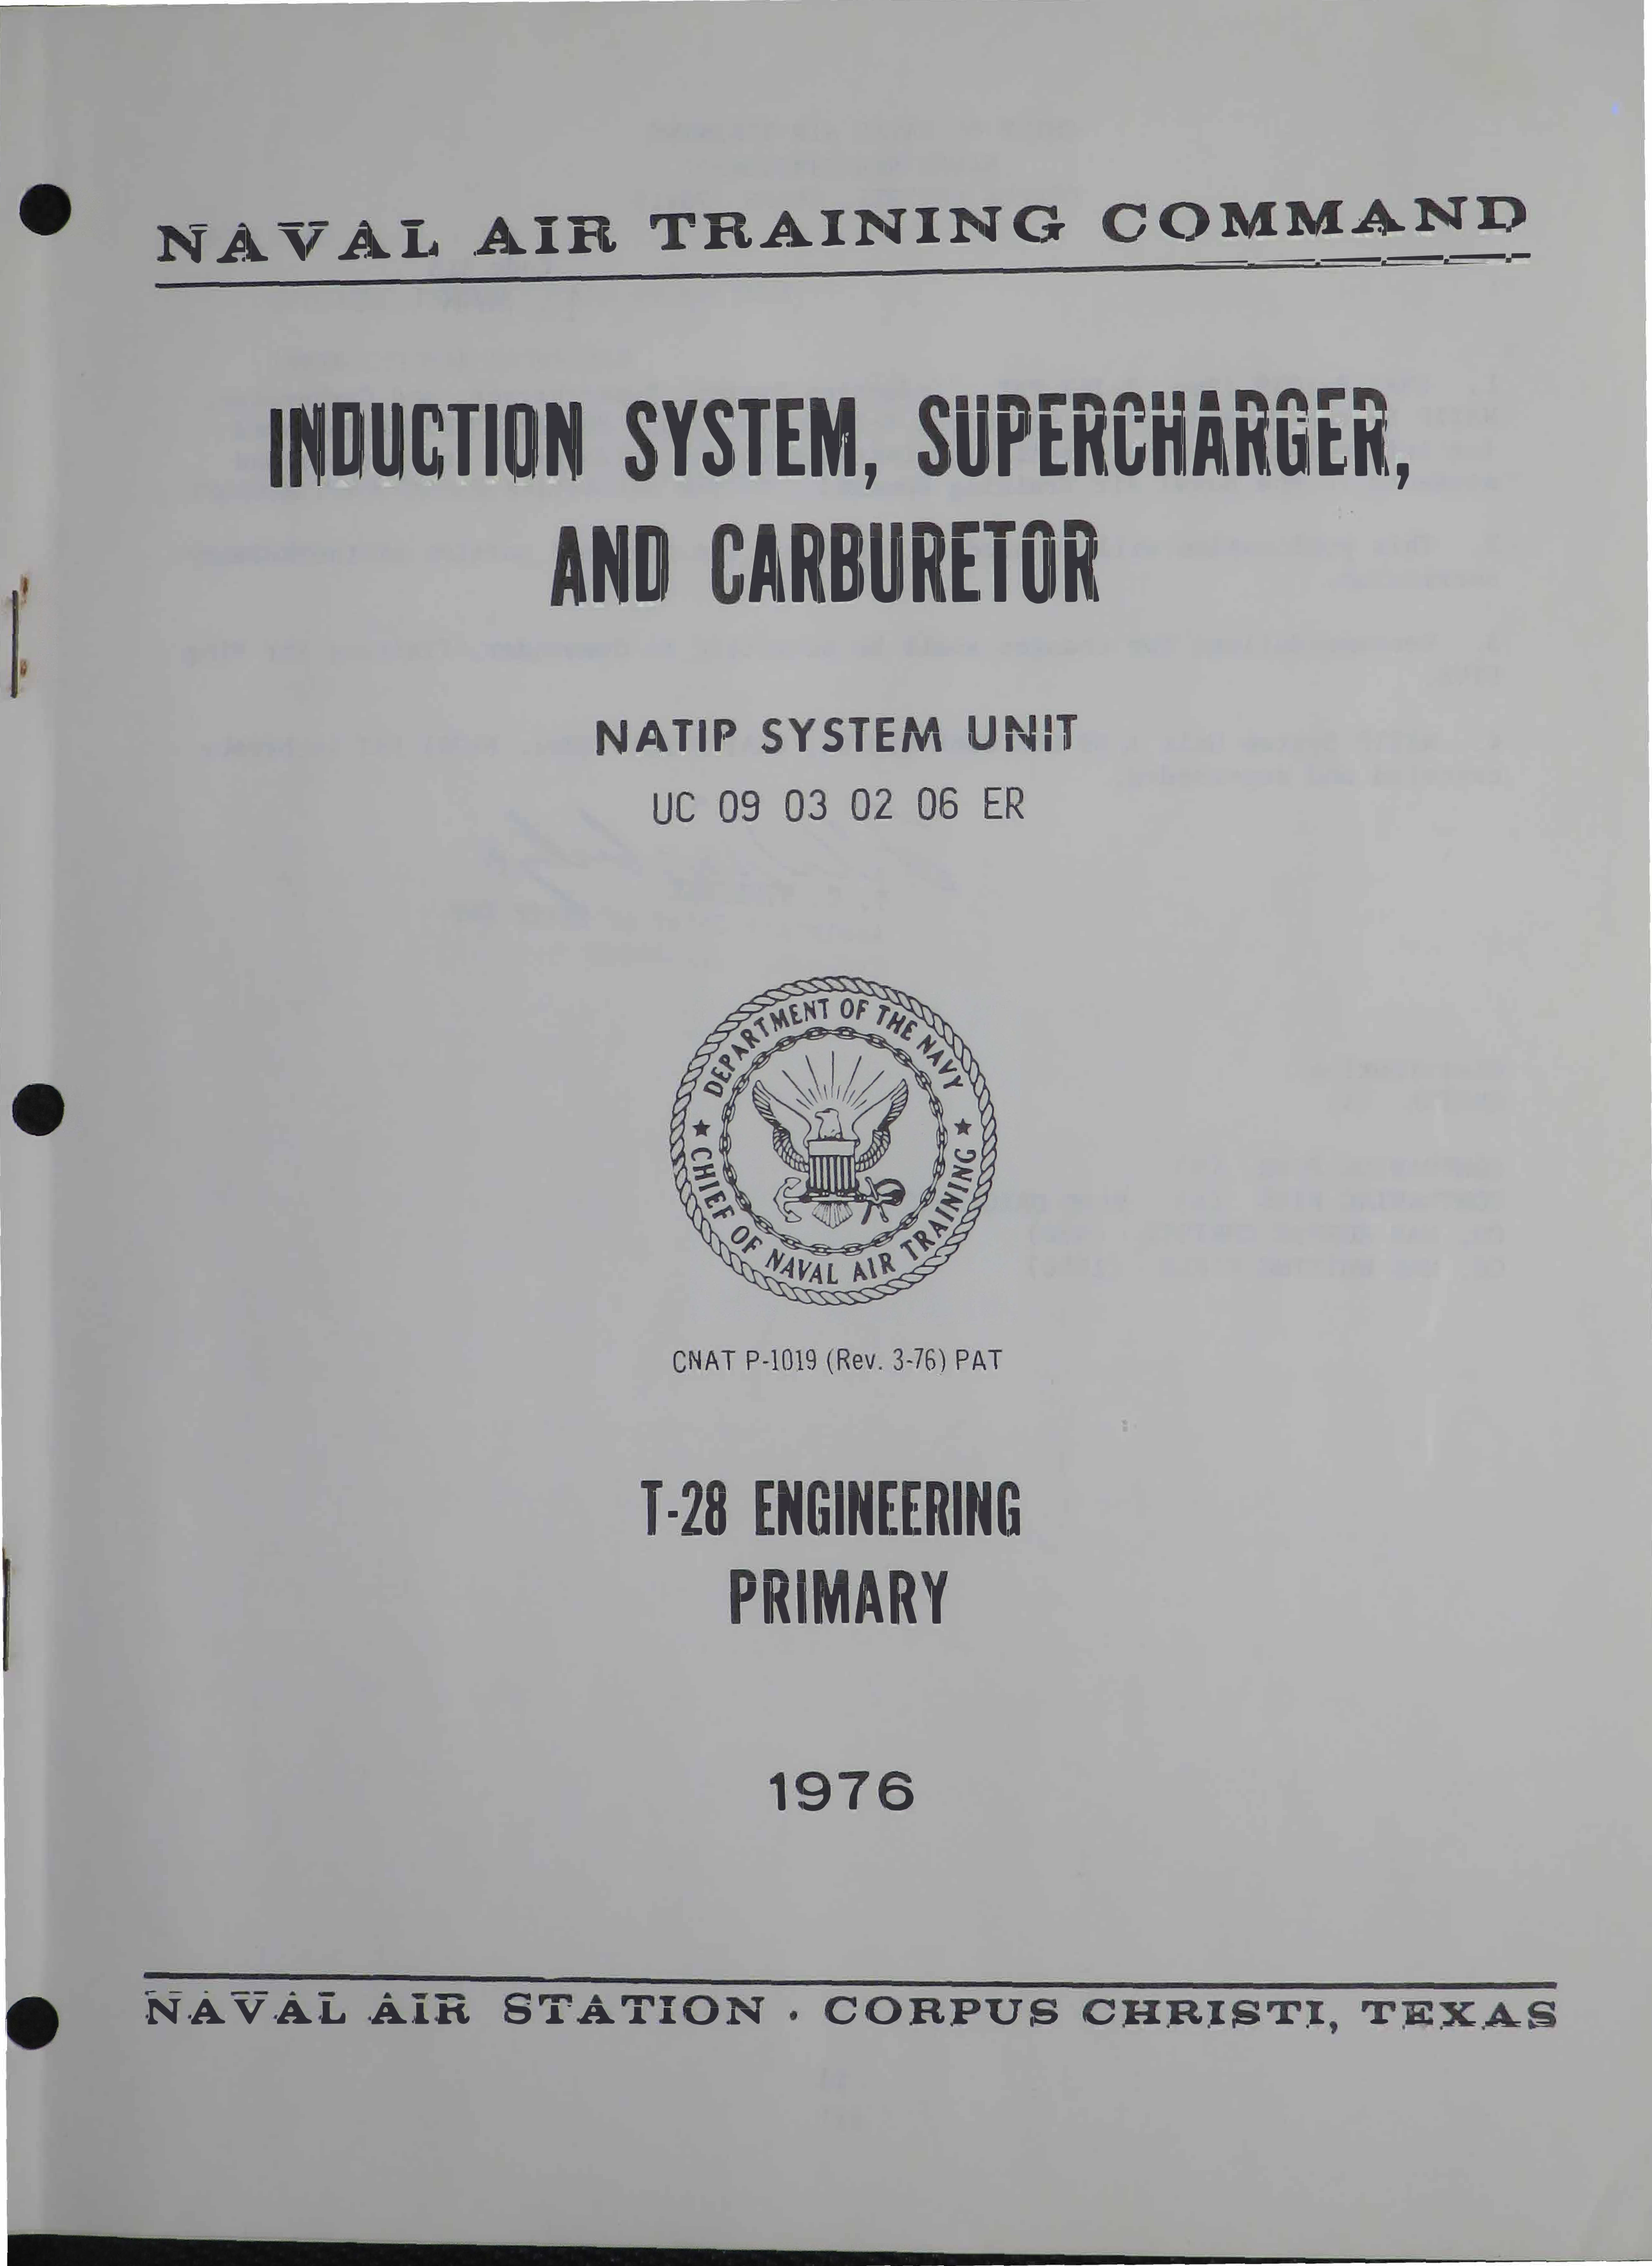 Sample page 1 from AirCorps Library document: Induction System, Supercharger, and Carburetor